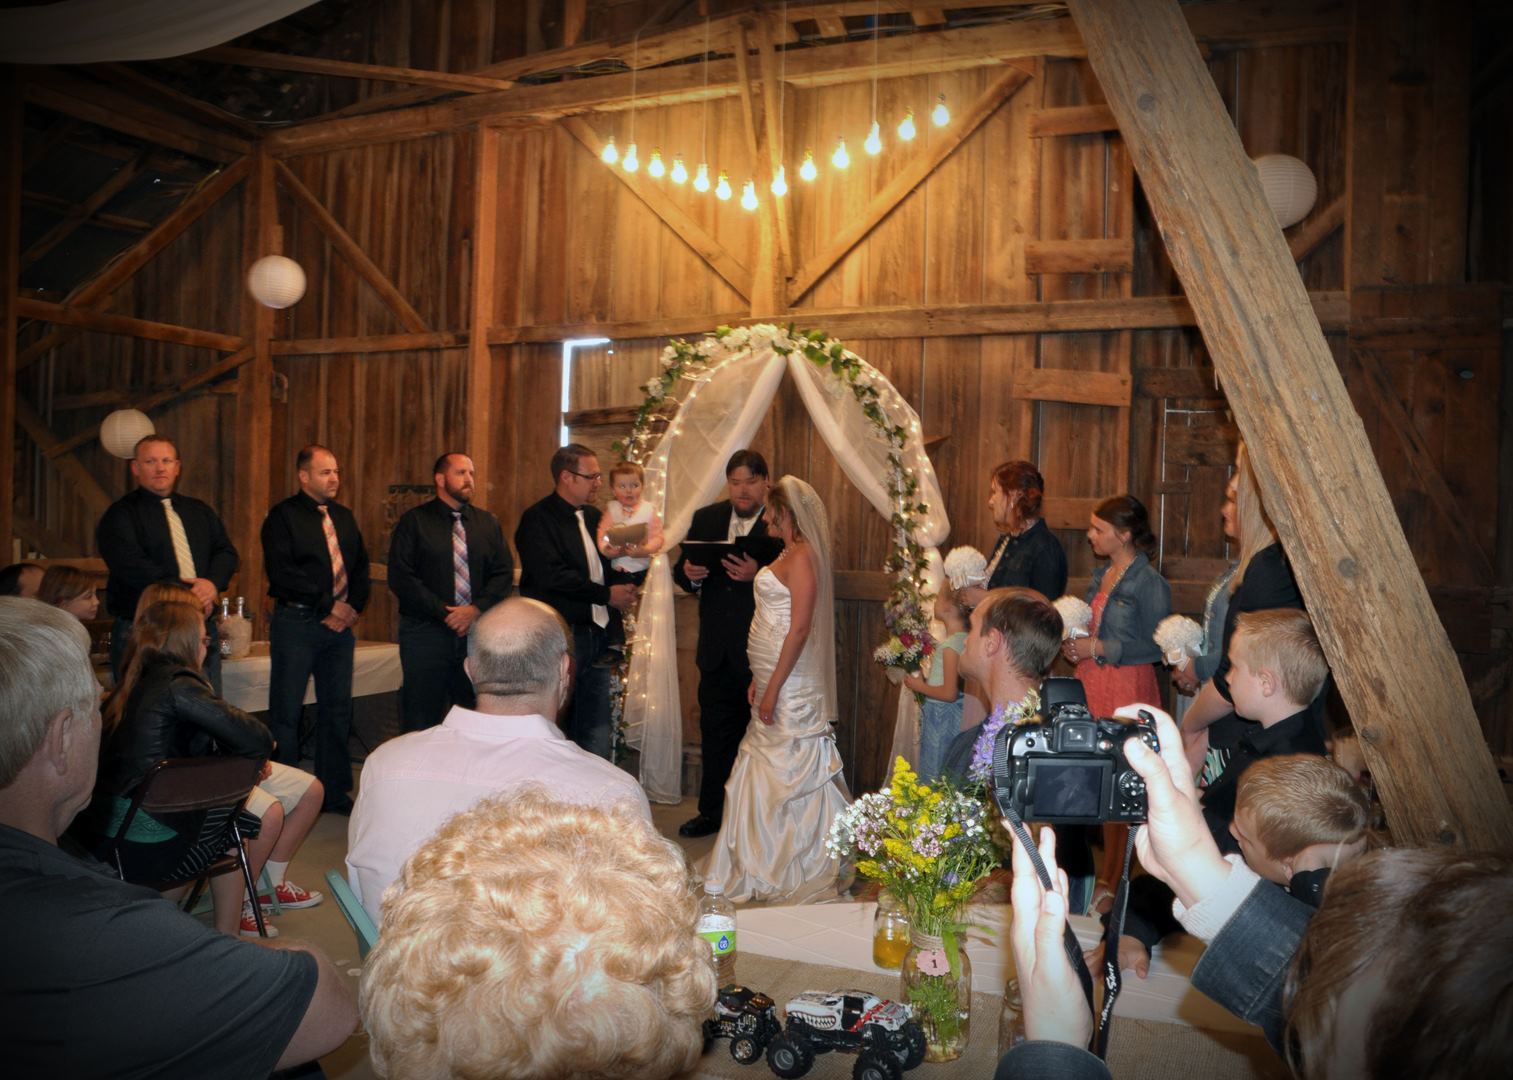 Just The Place Barn Weddings - 7